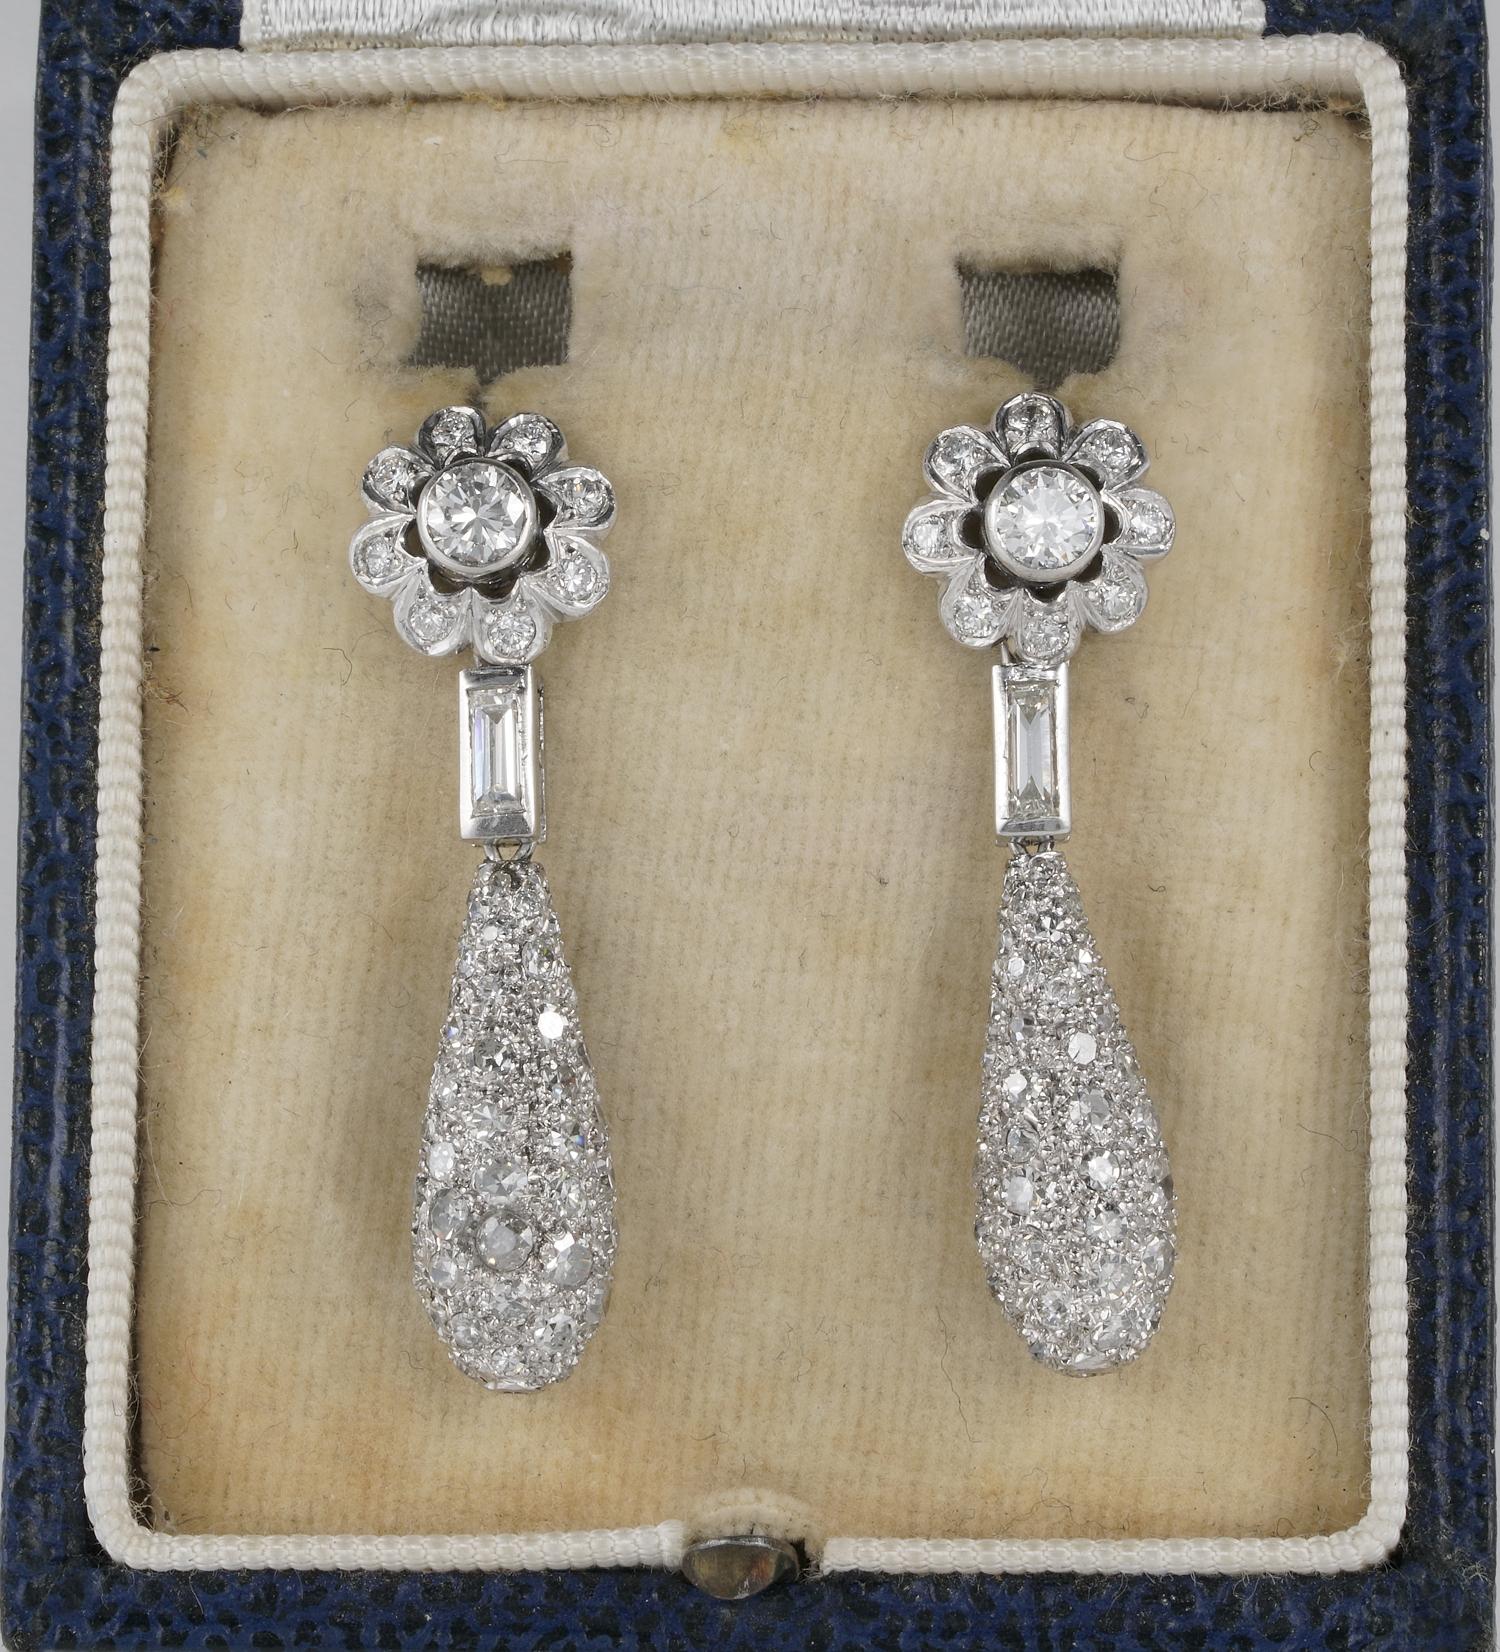 Art Deco Daisy top with swinging drop Diamond earrings
Superbly hand during 1920 of solid Platinum
Amazing workmanship between crafting and stone setting
Richly set with old cut Diamonds set throughout from top to the entire drop pendant
Diamonds